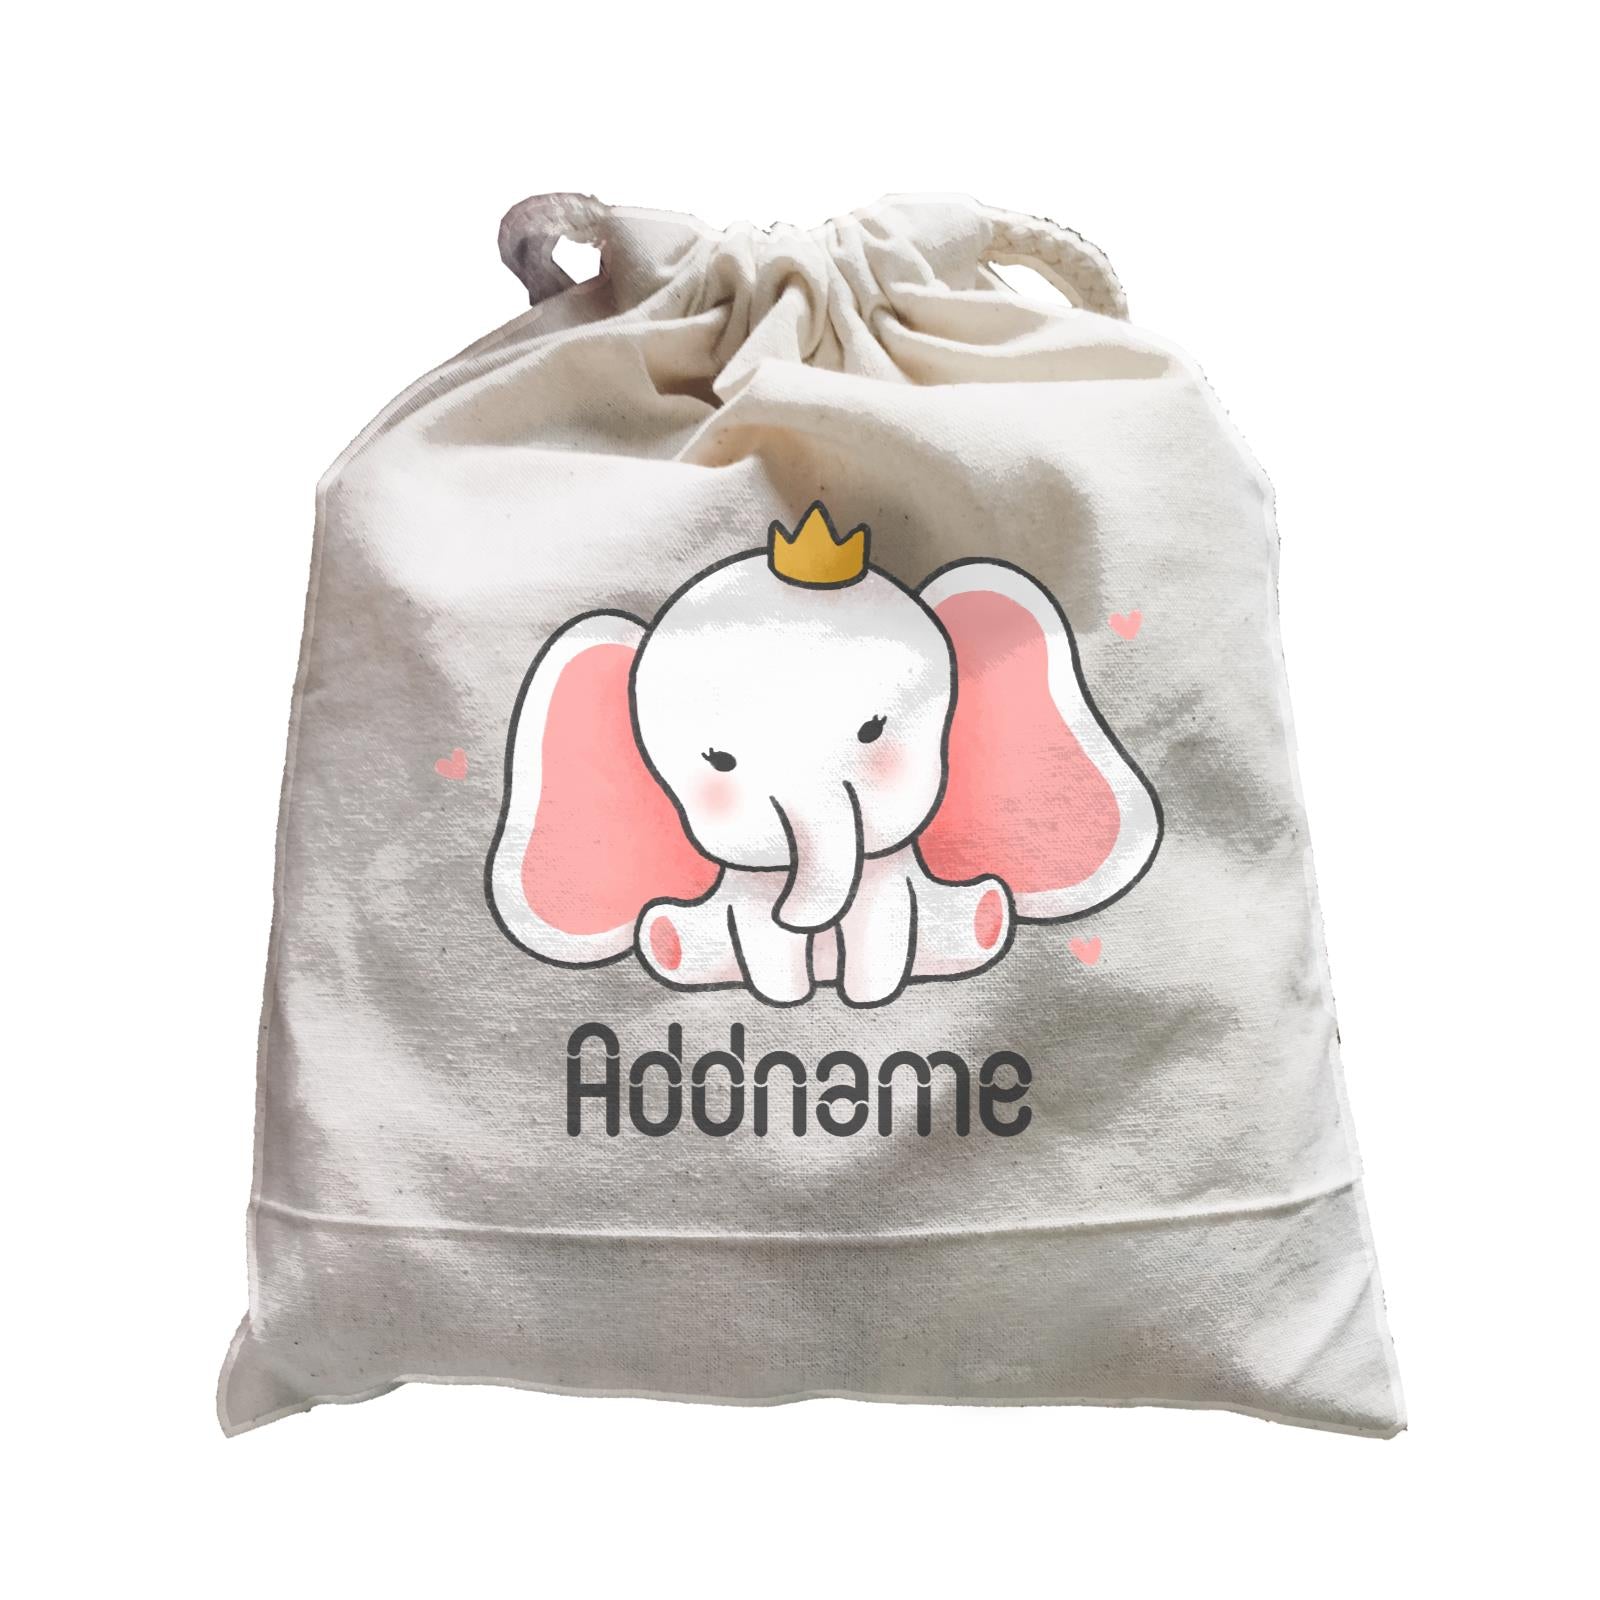 Cute Hand Drawn Style Baby Elephant with Crown Addname Satchel